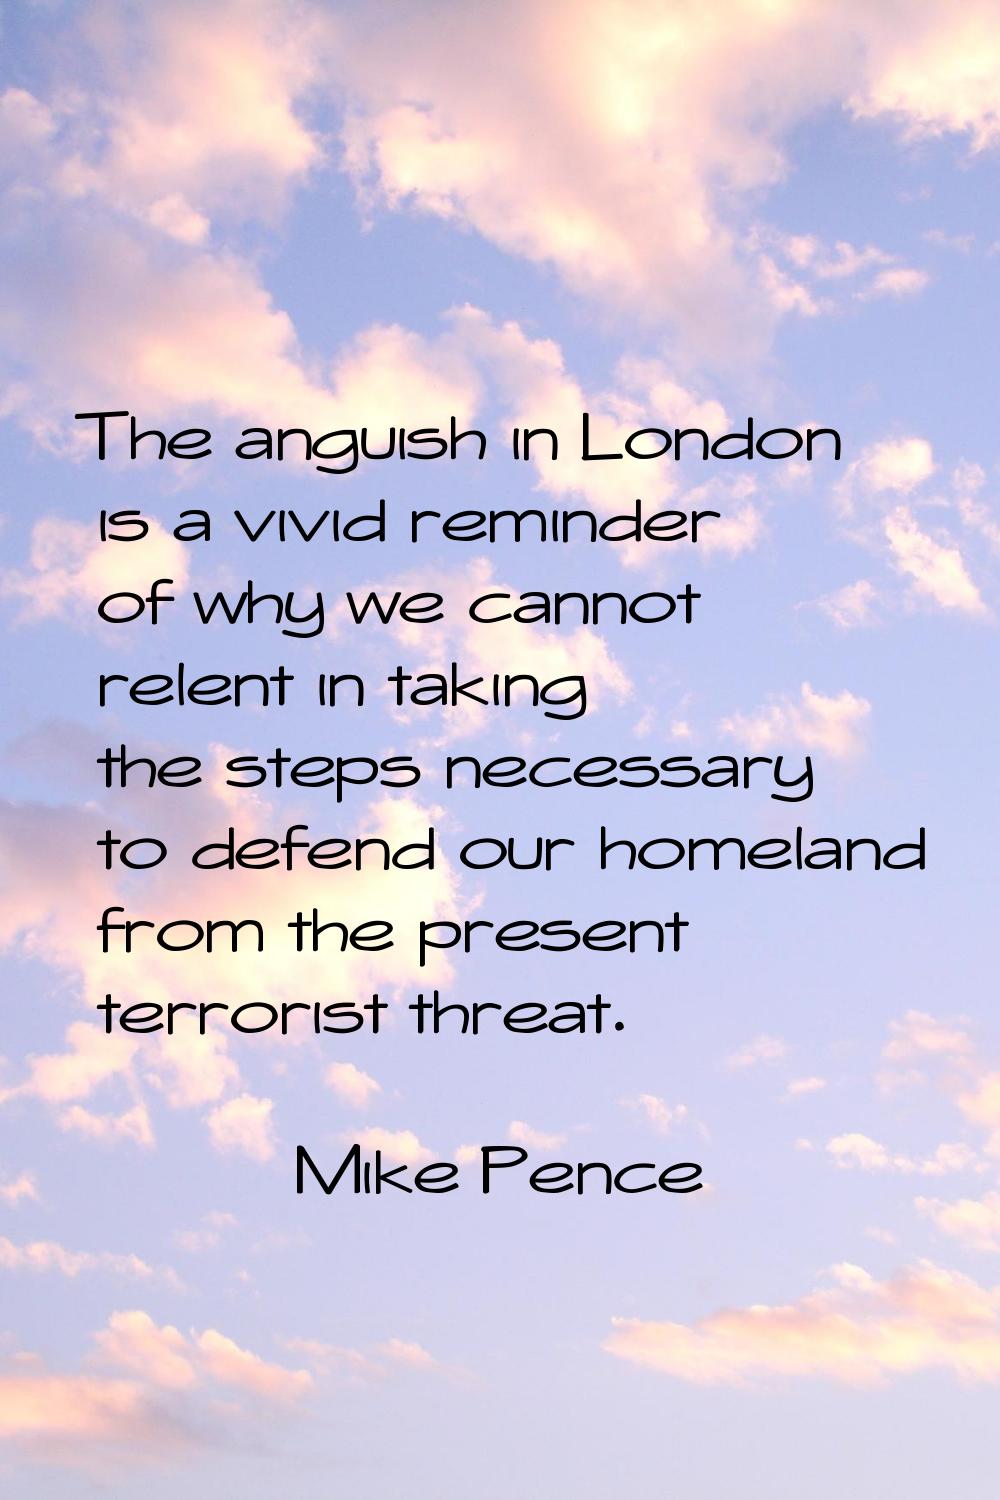 The anguish in London is a vivid reminder of why we cannot relent in taking the steps necessary to 